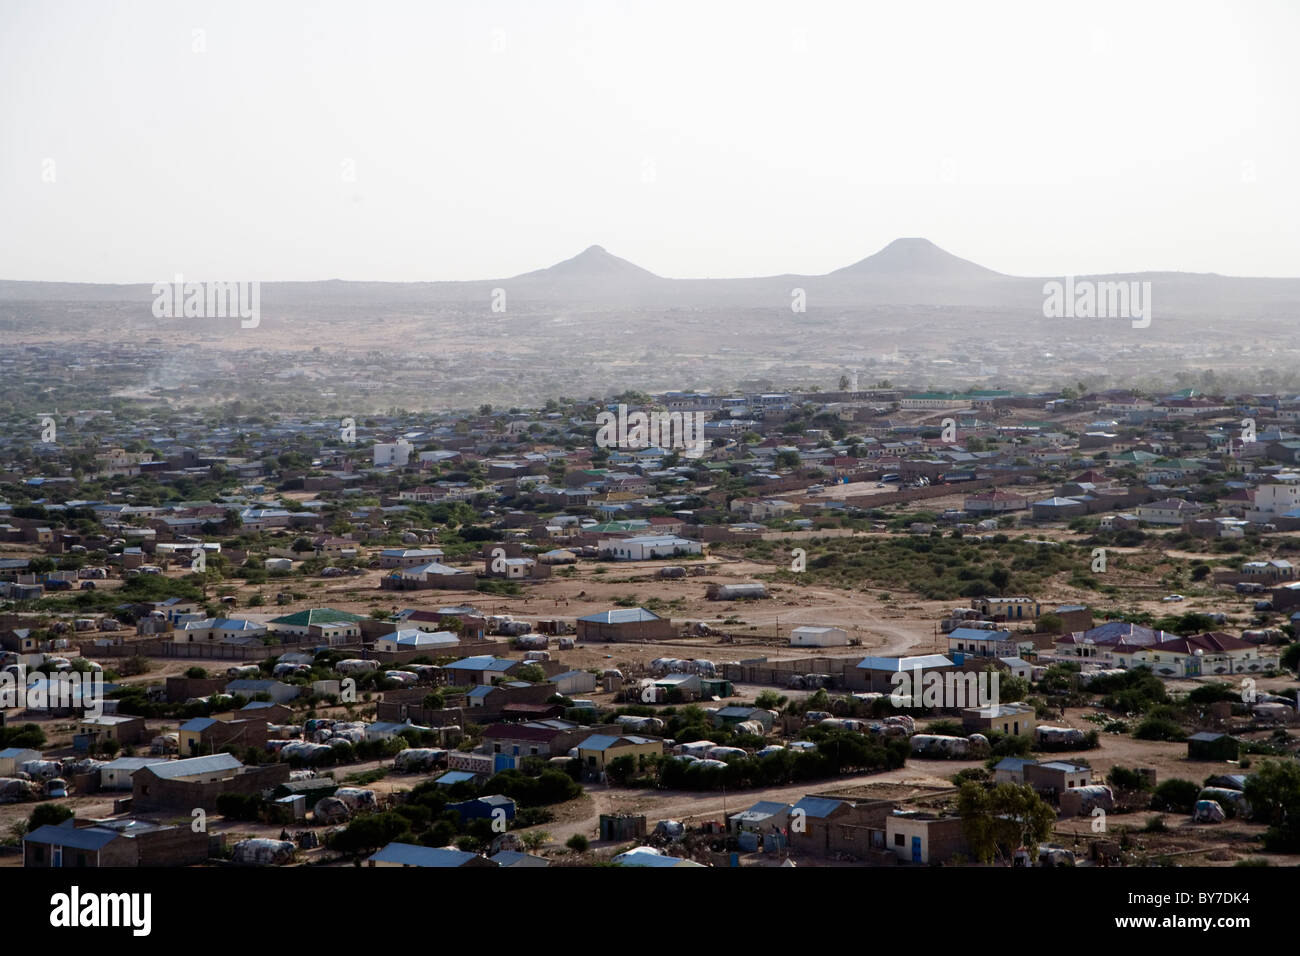 View of Hargeysa, capital of Somaliland with Naasa Hablood Hills in the background, Africa Stock Photo